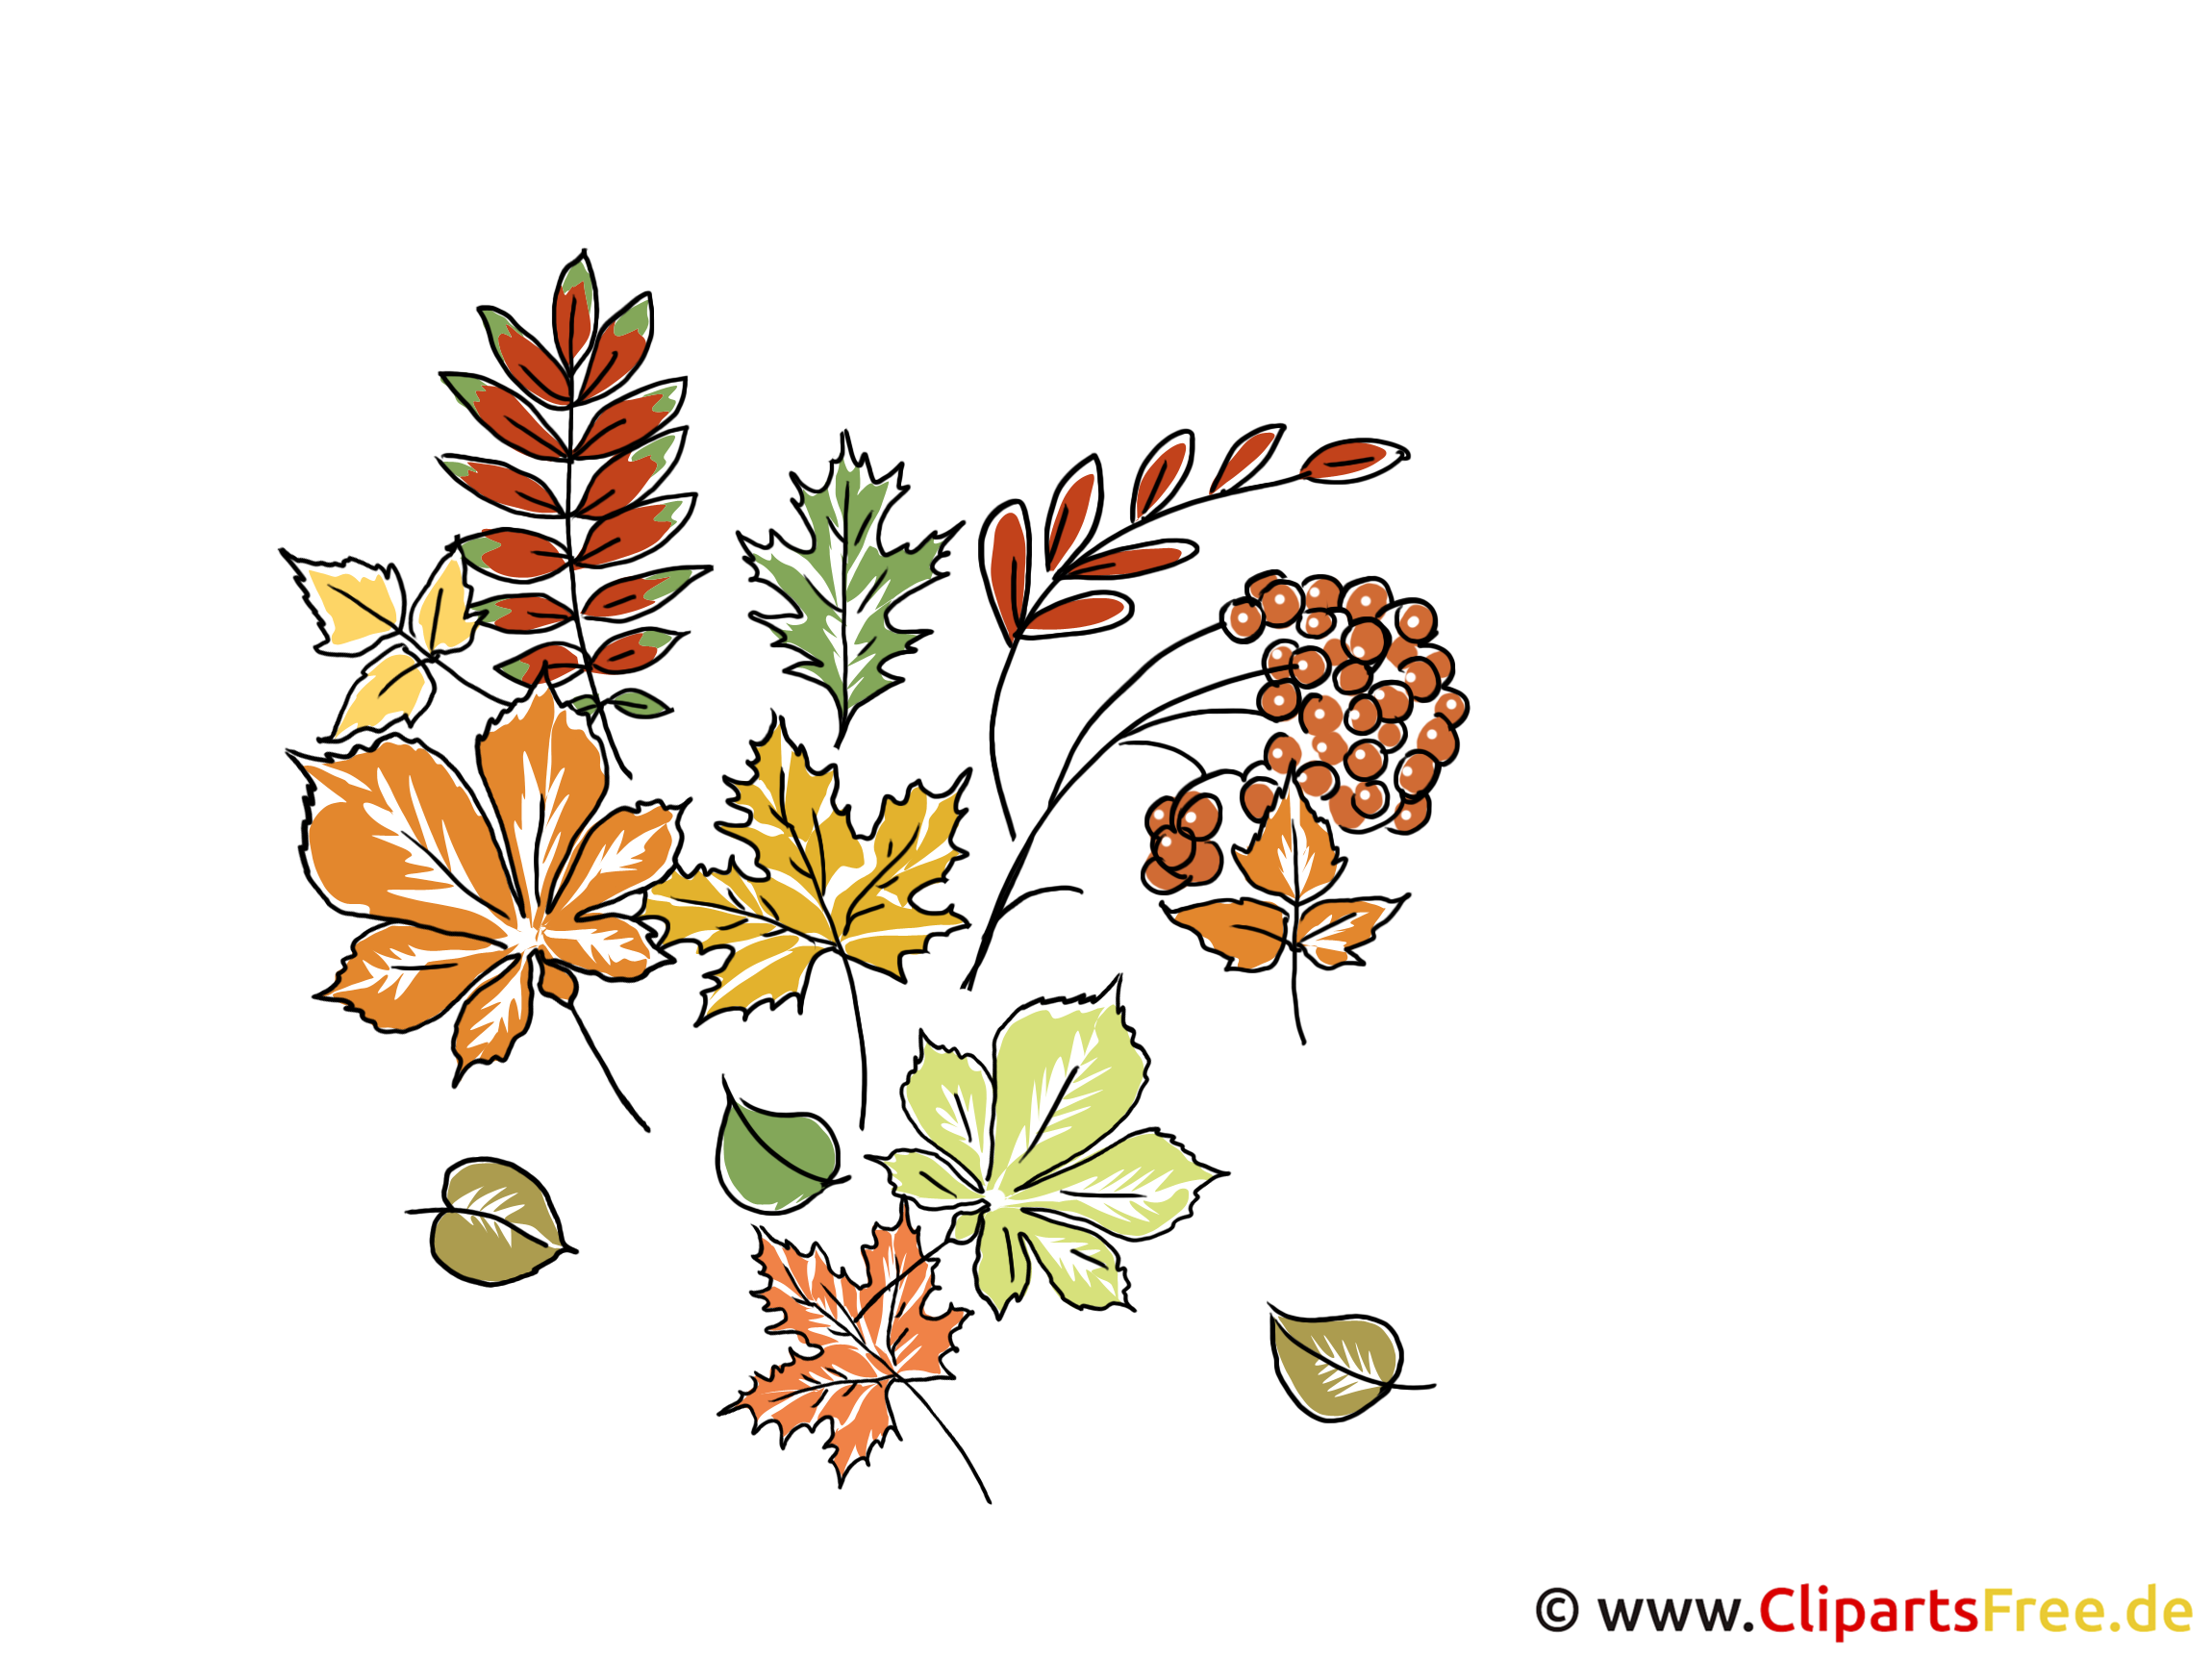 cliparts herbst - photo #14